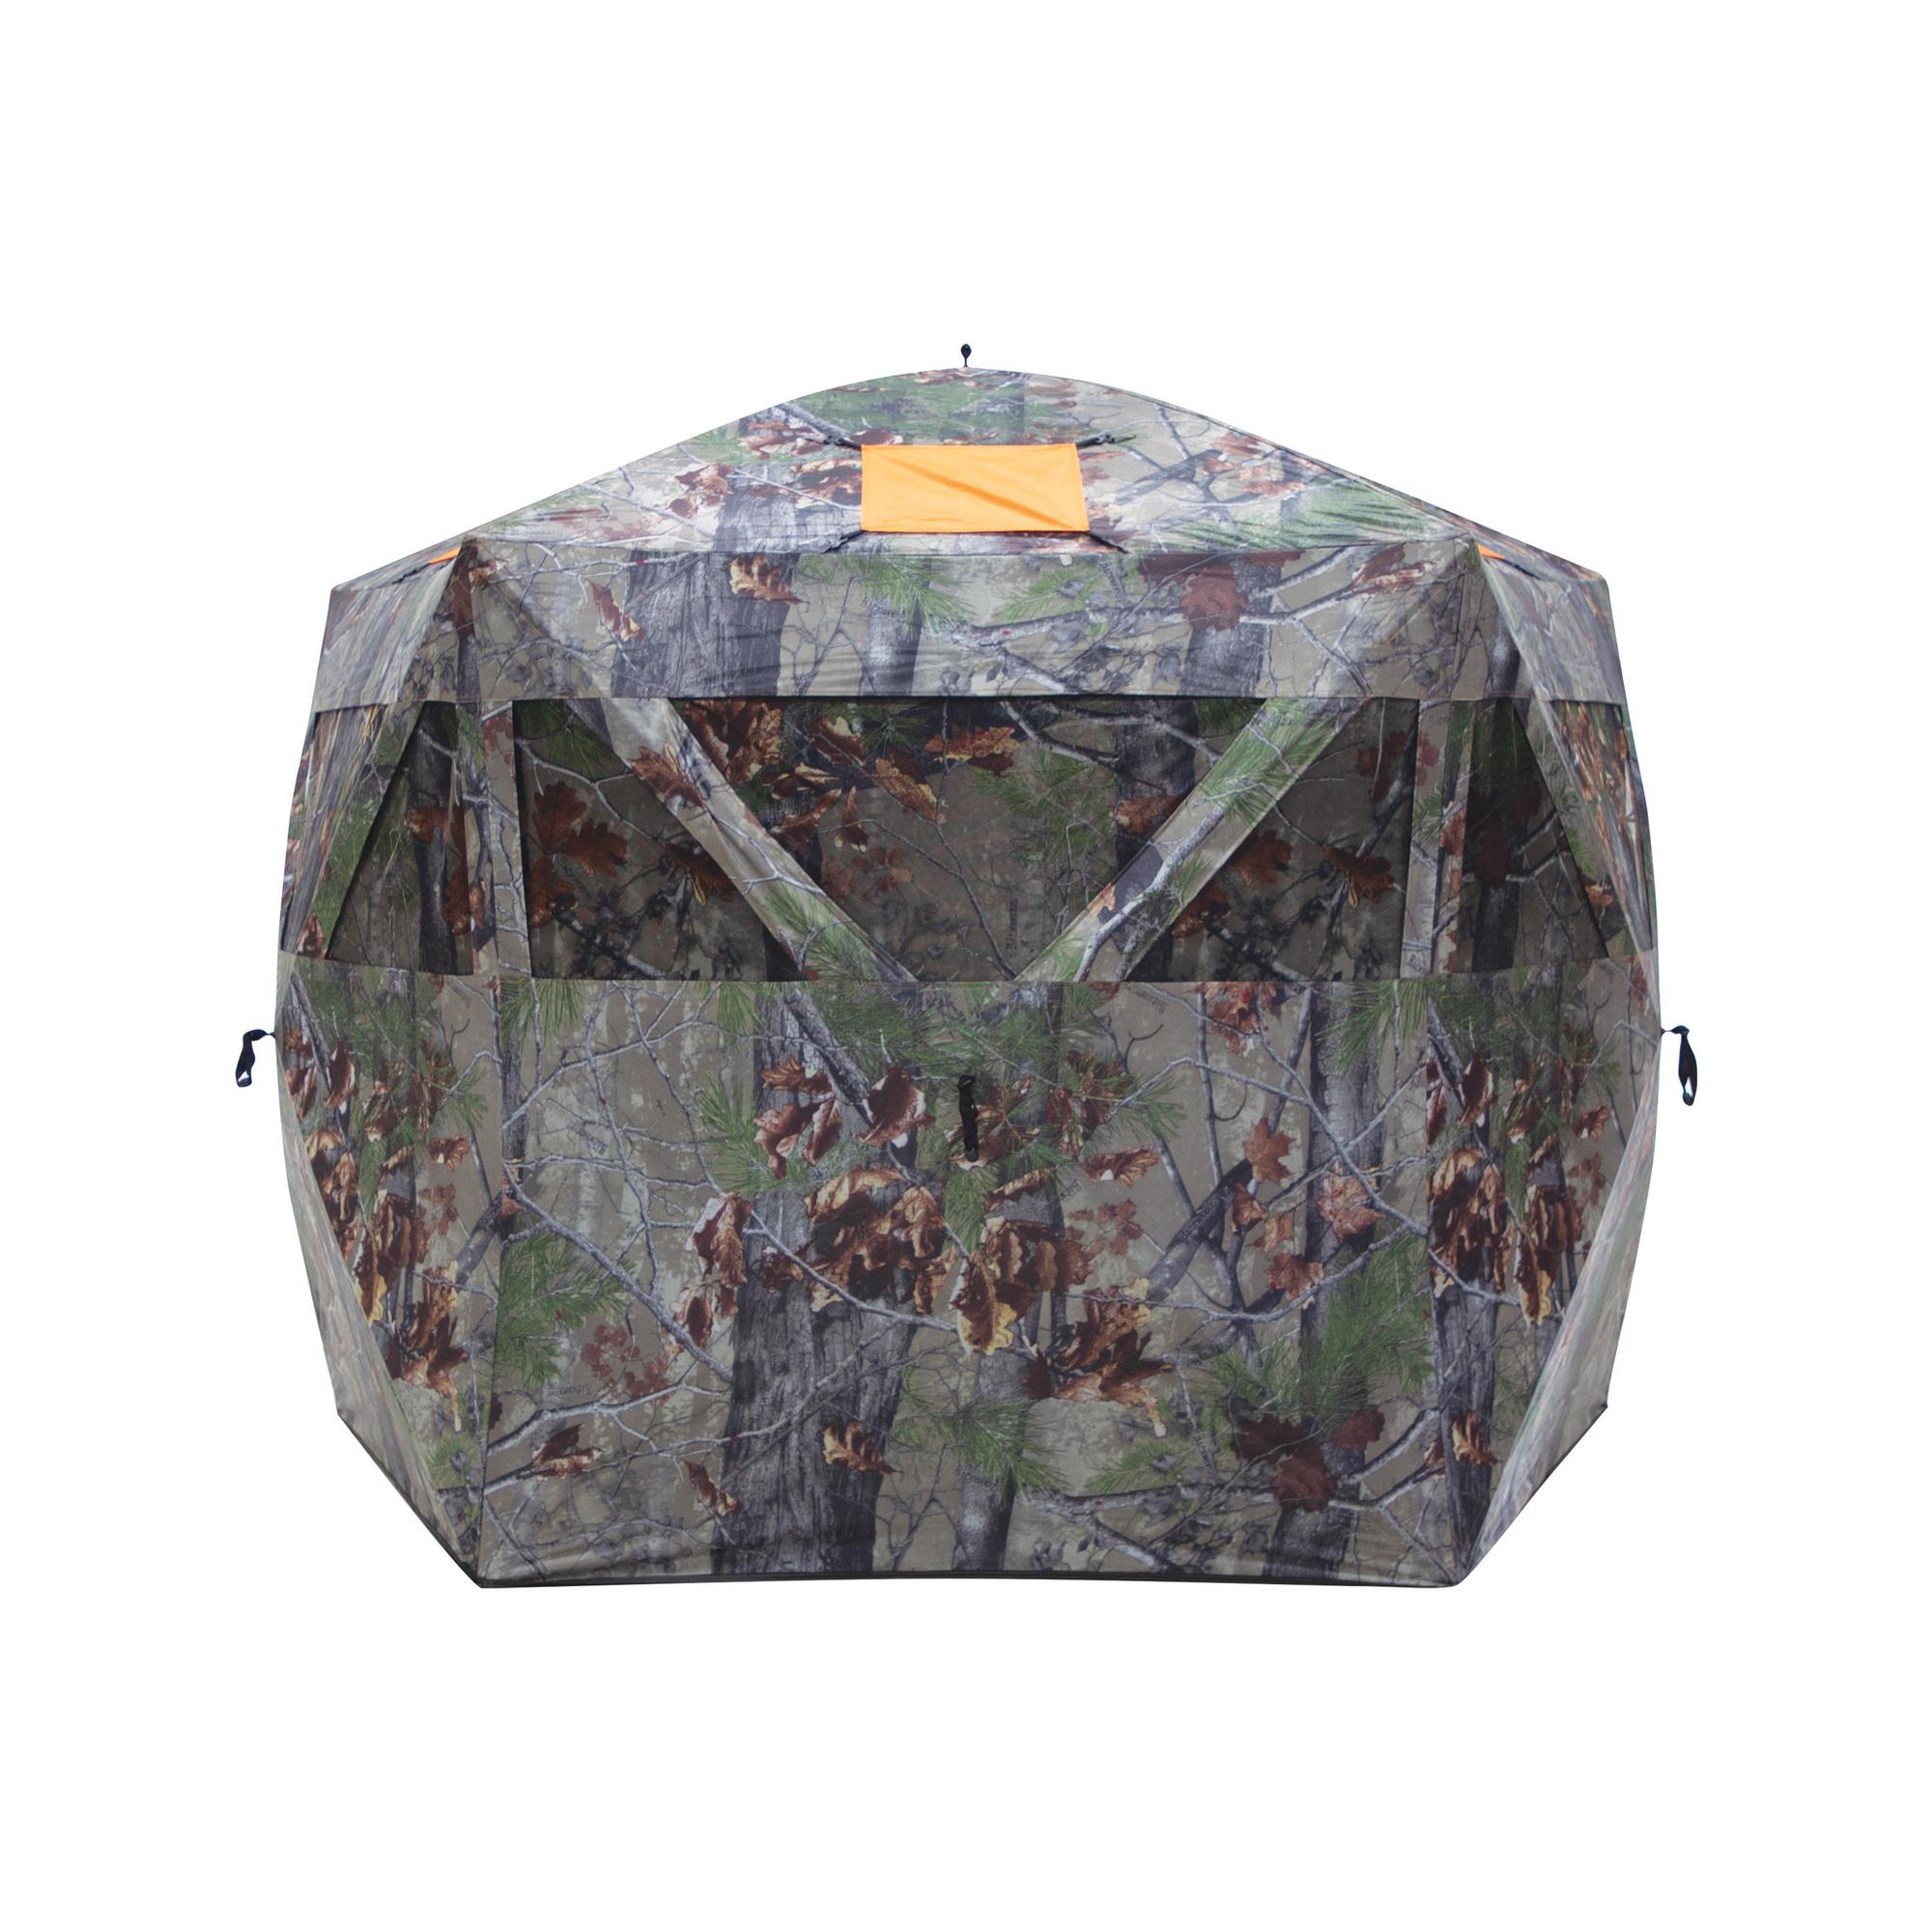 Barronett Blinds, Feather Five Hunting Blind, 4-Person Capacity, Color Camouflage, Material Polyester, Model FF500BW